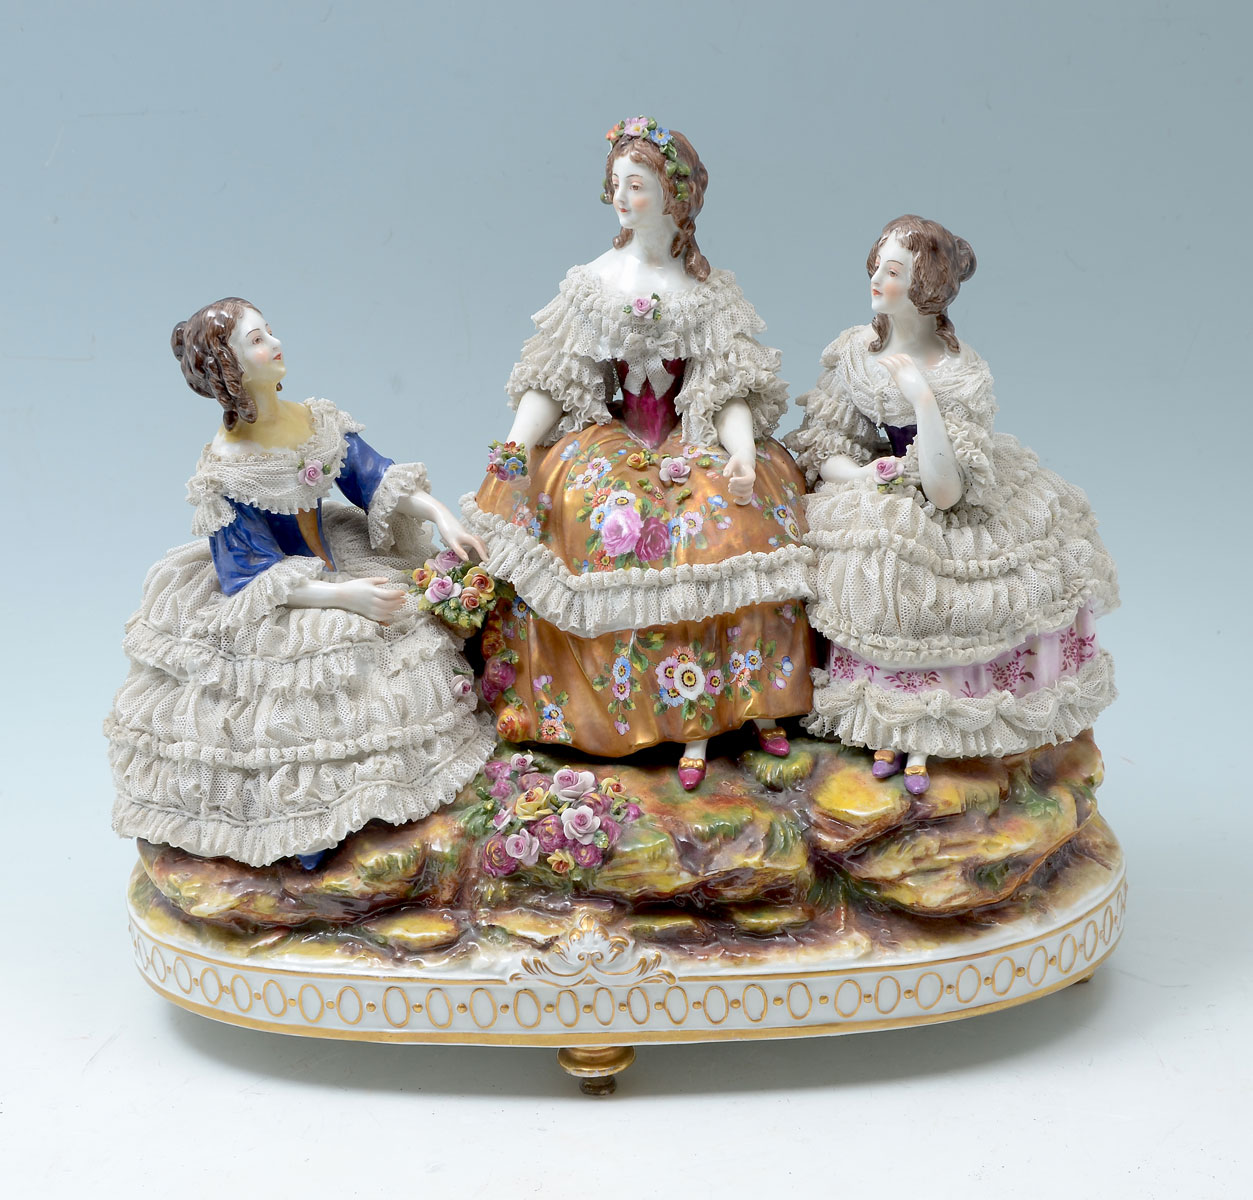 EARLY 20TH C. CAPODIMONTE PORCELAIN